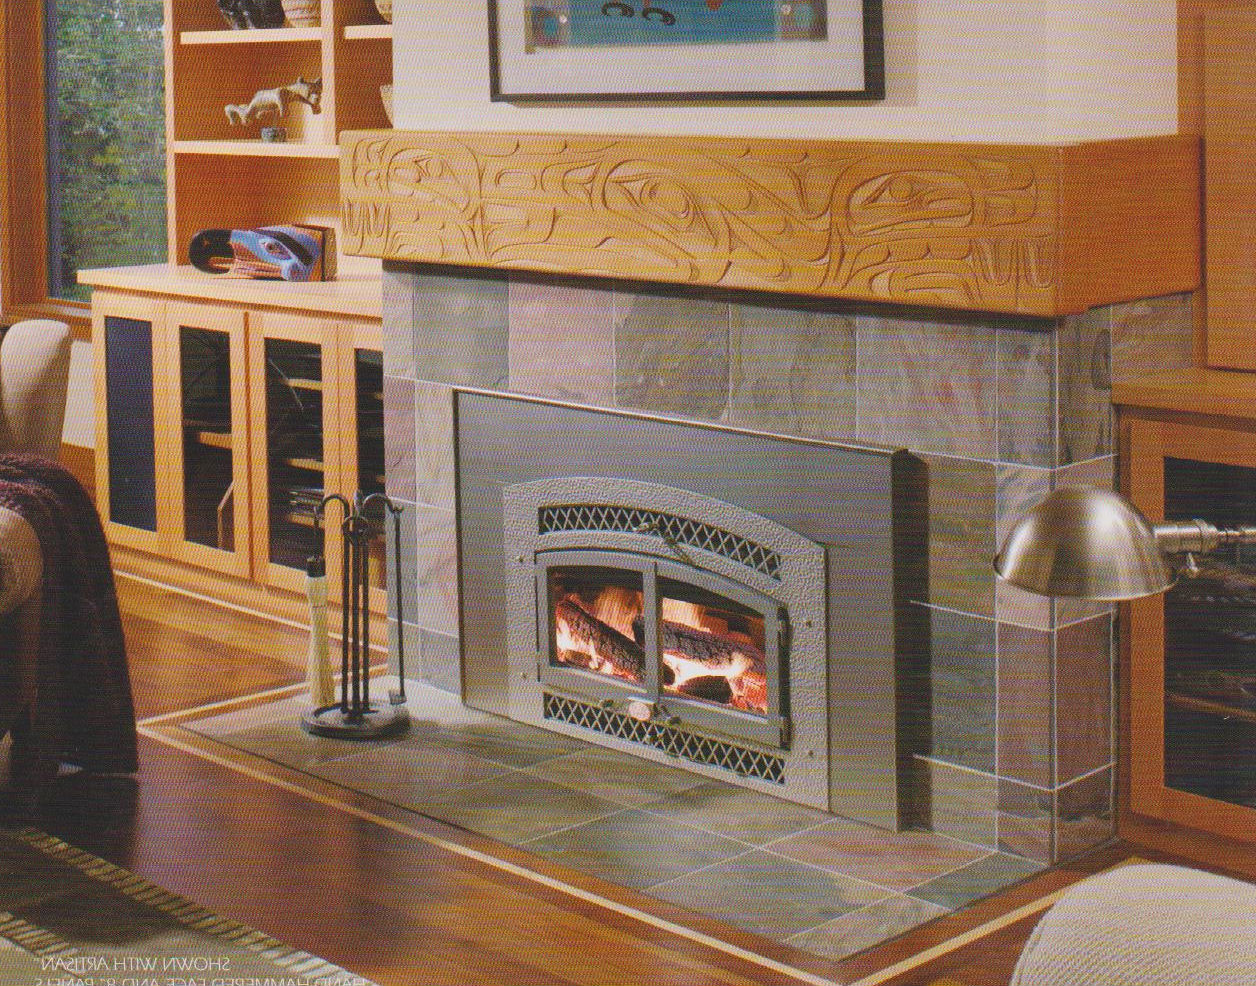 how to install fireplace insert, victorian gas fireplace insert, glo king fireplace insert, high efficiency gas fireplace insert heating